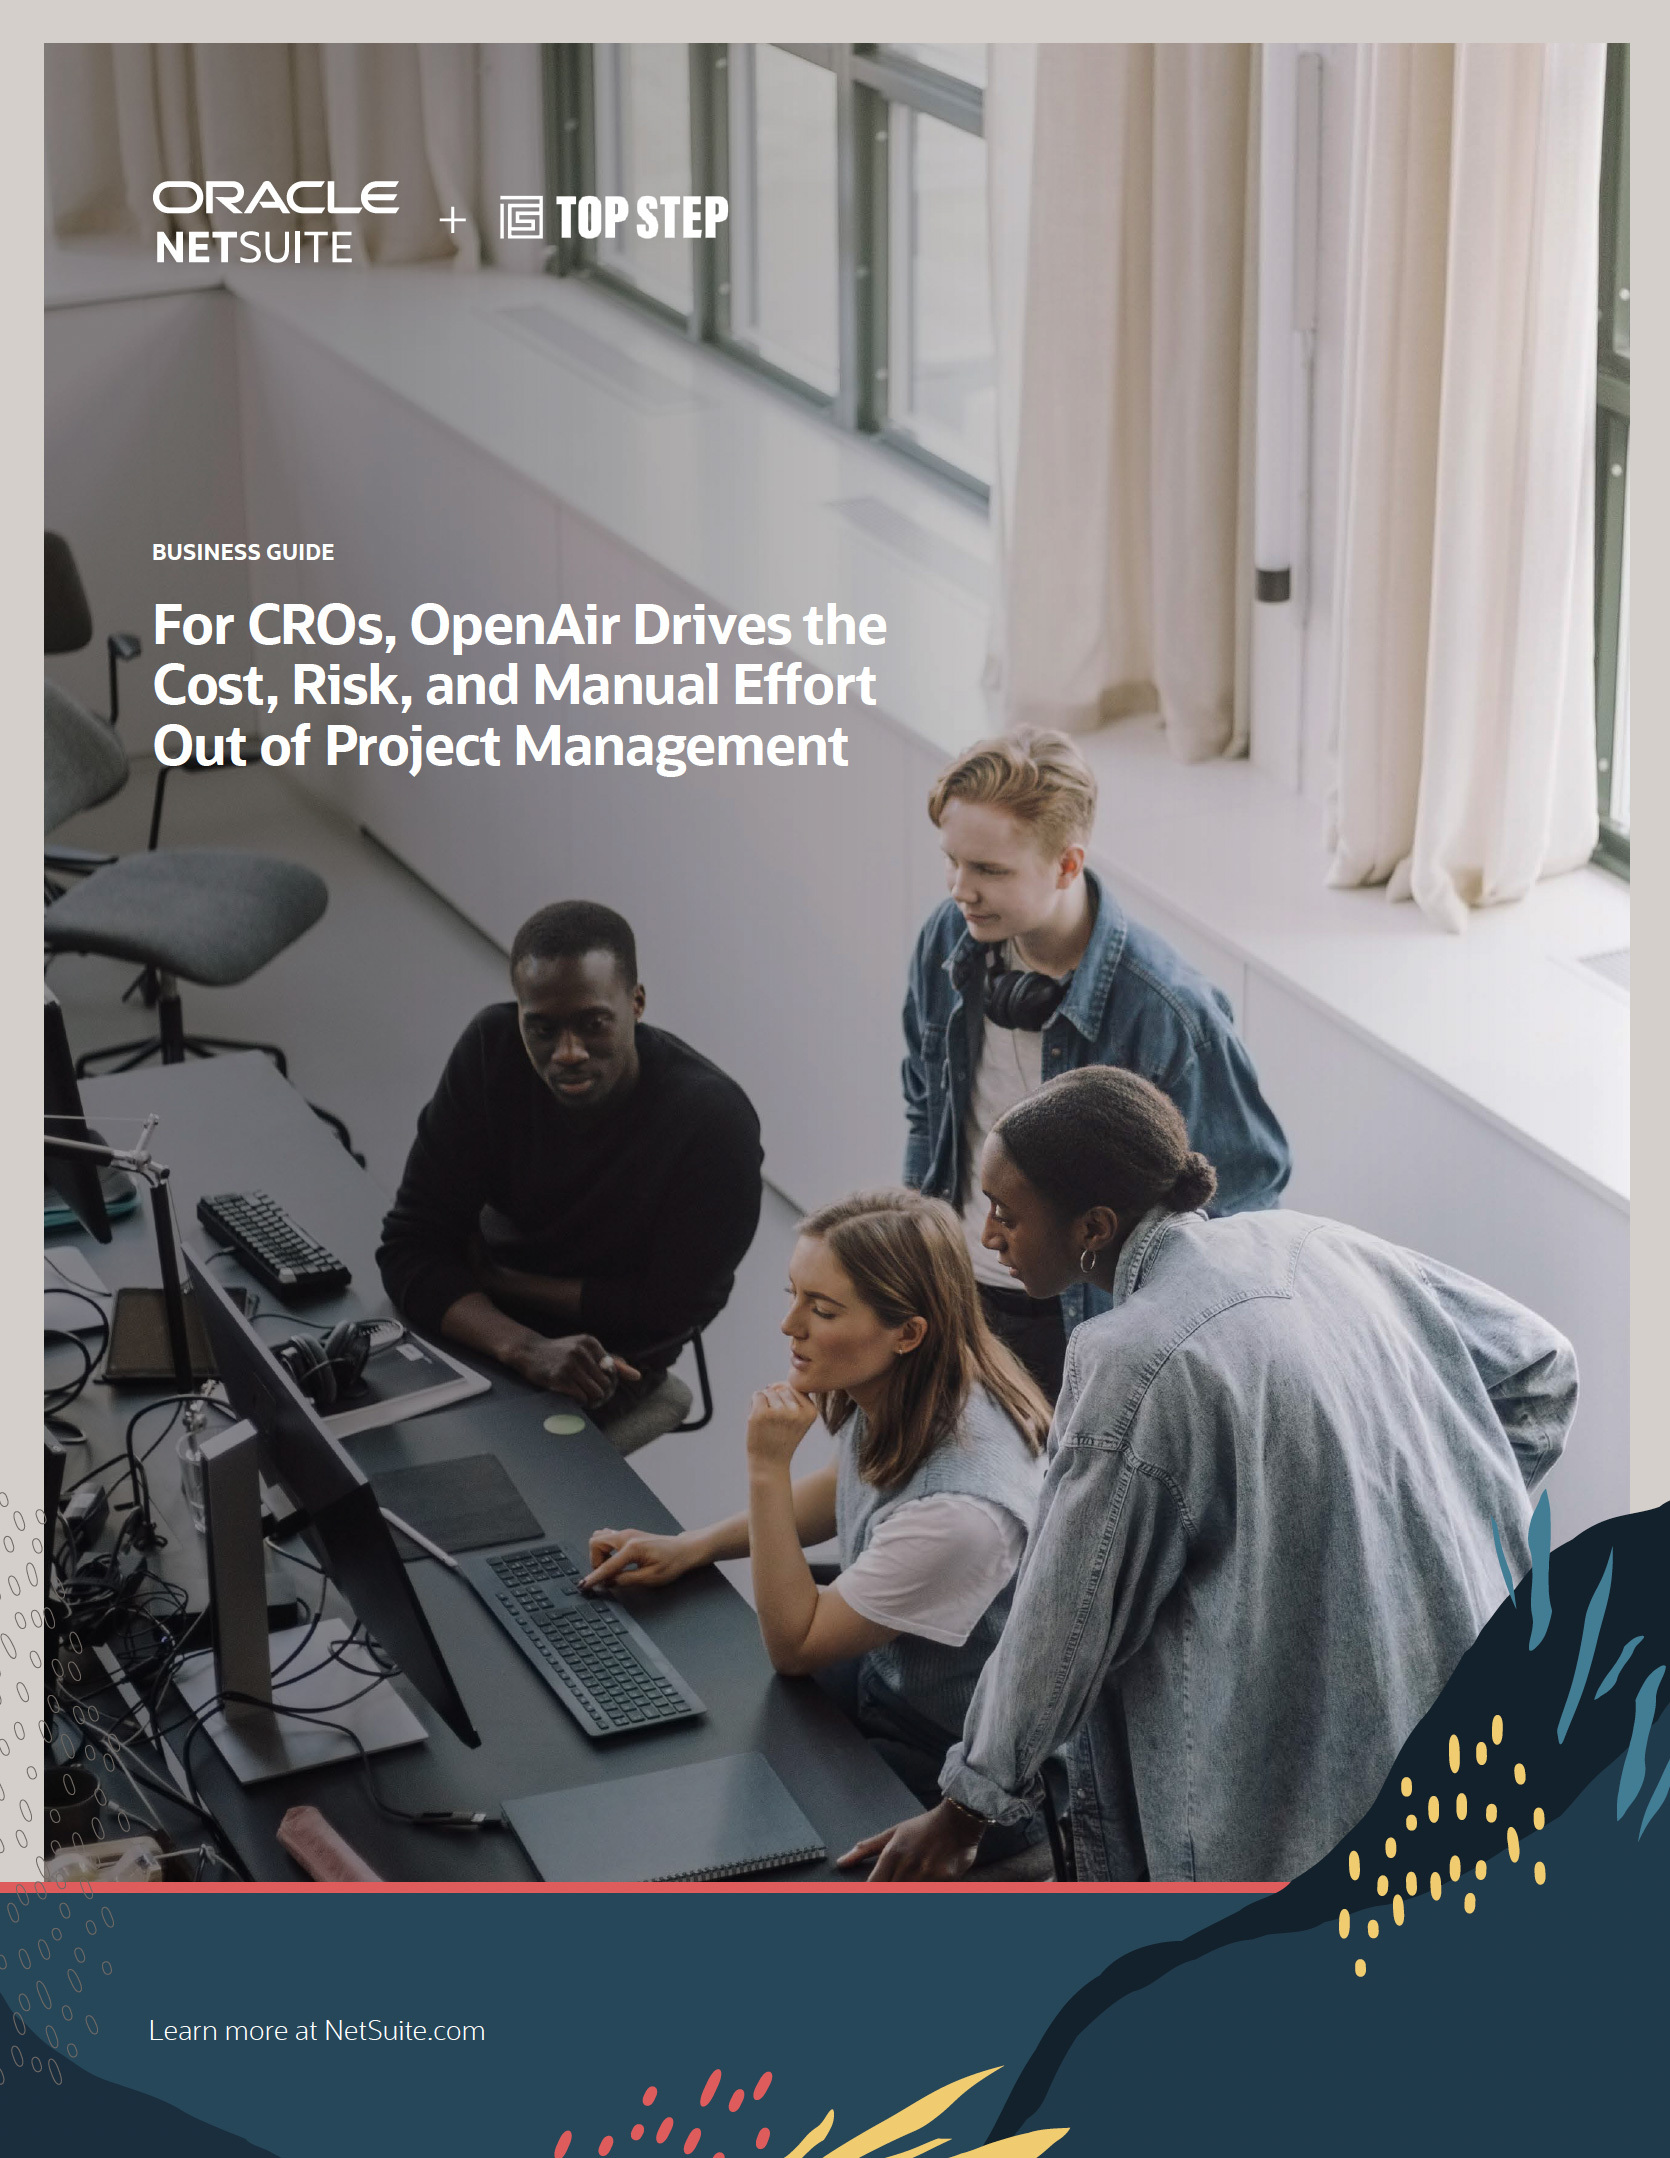 Cover Page for the CRO Business Guide, OpenAir Drives the cost, risk, and manual effort out of project management